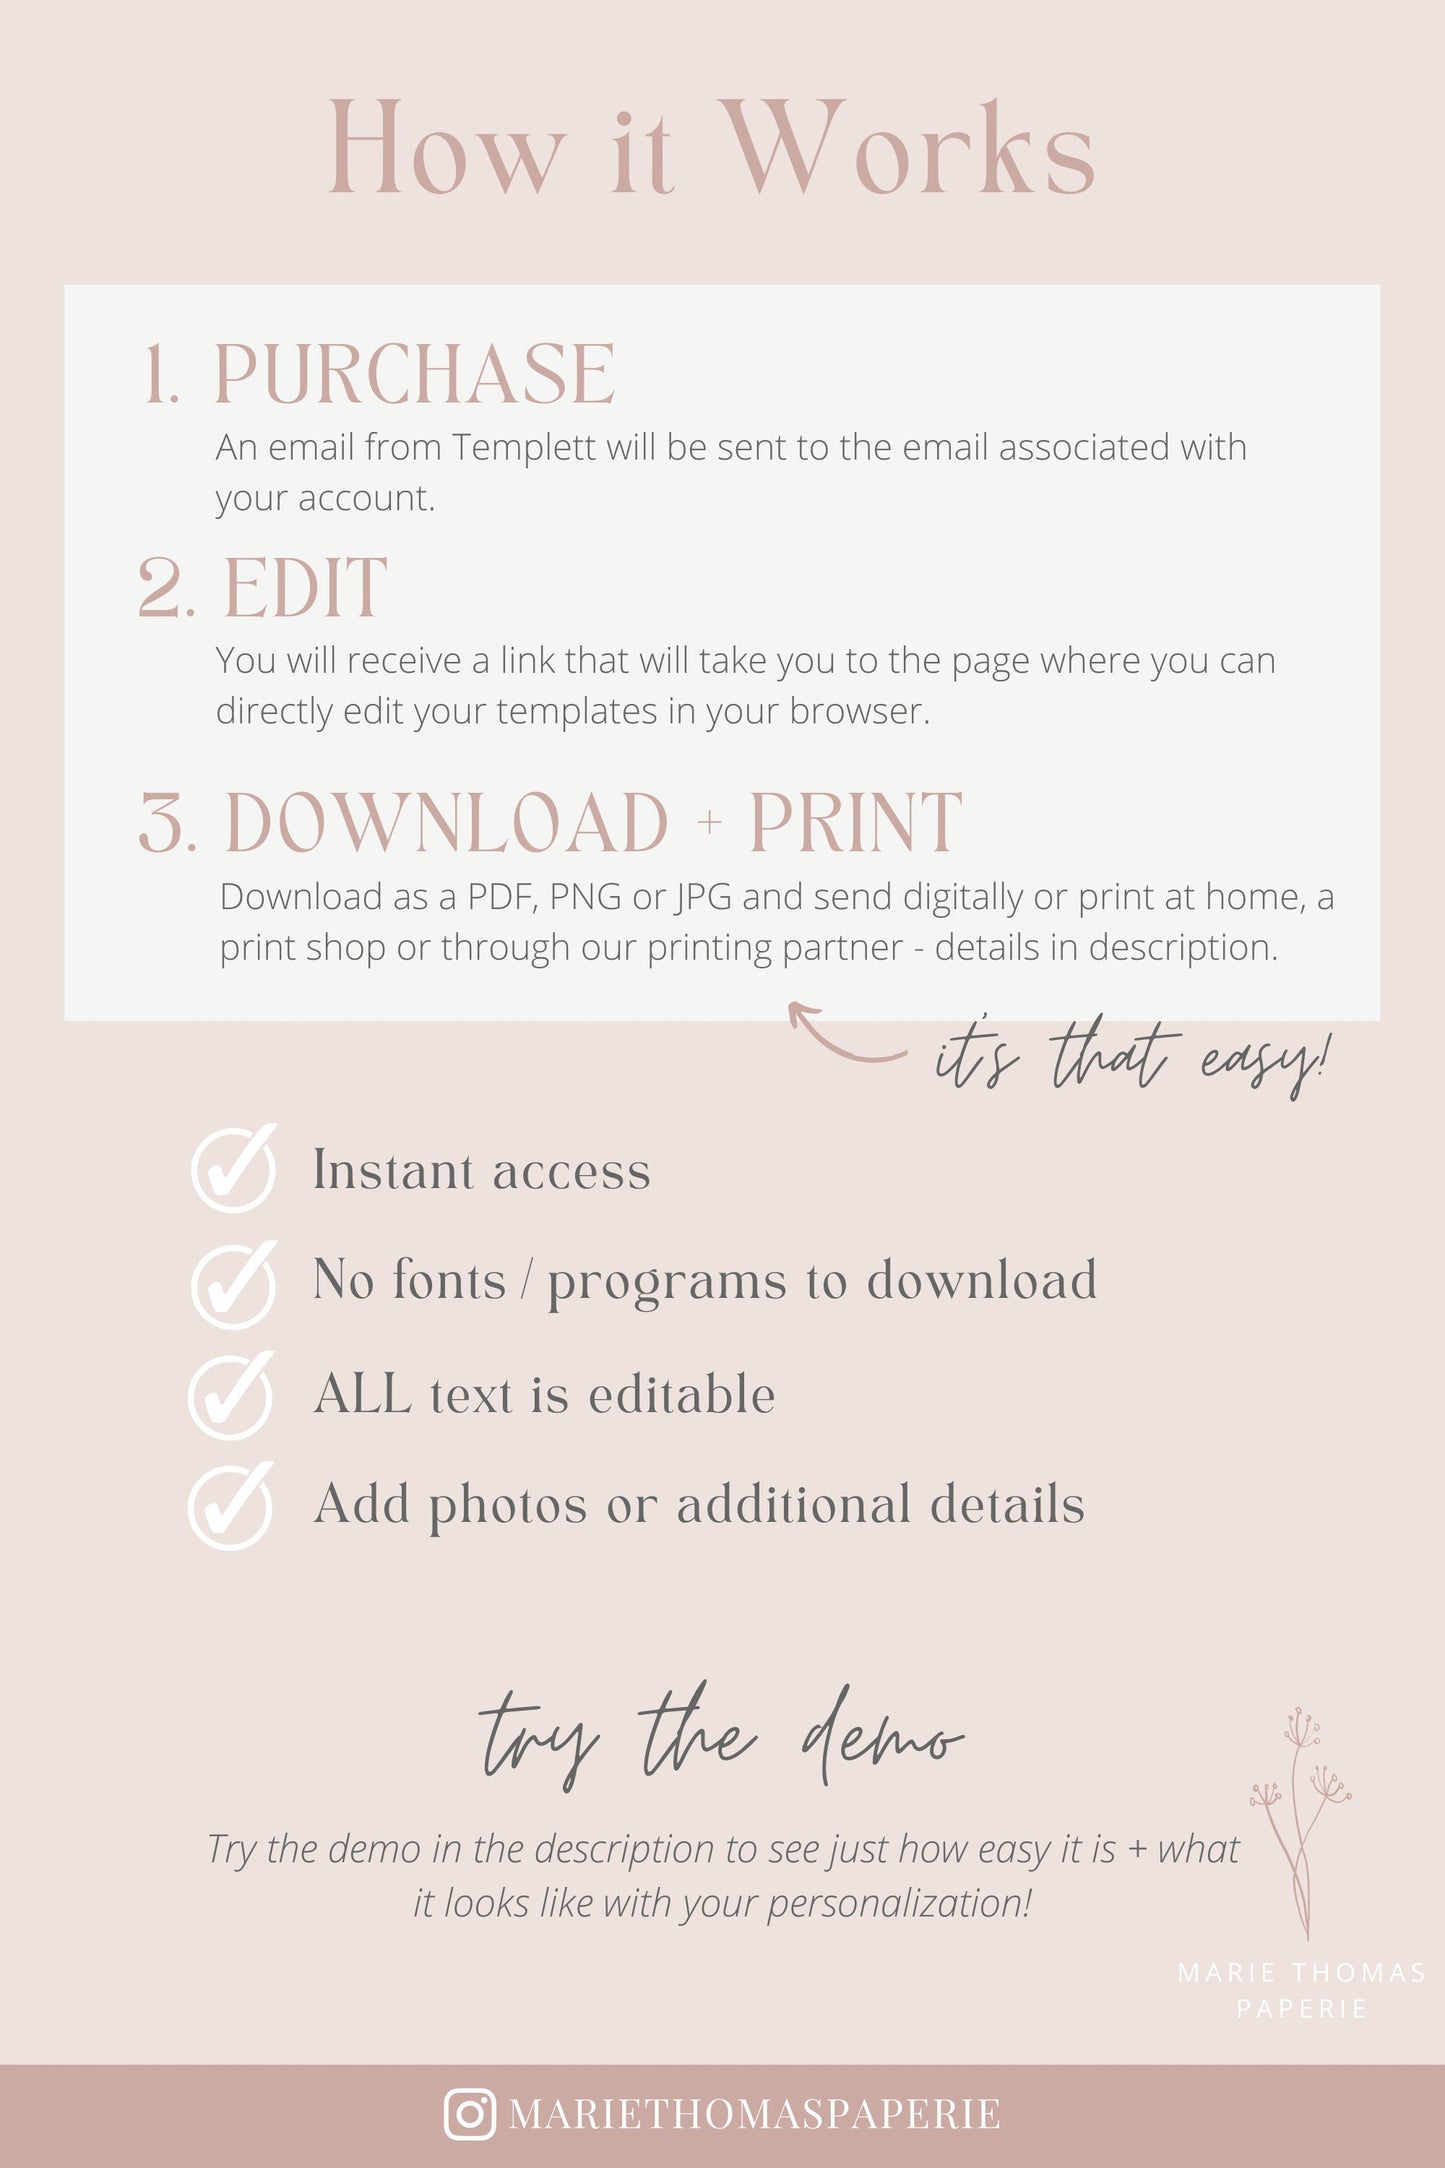 Editable Brunch and Bubbly Bridal Shower Invitation Blush Pink & Gold Watercolor Bridal Shower Invite Template